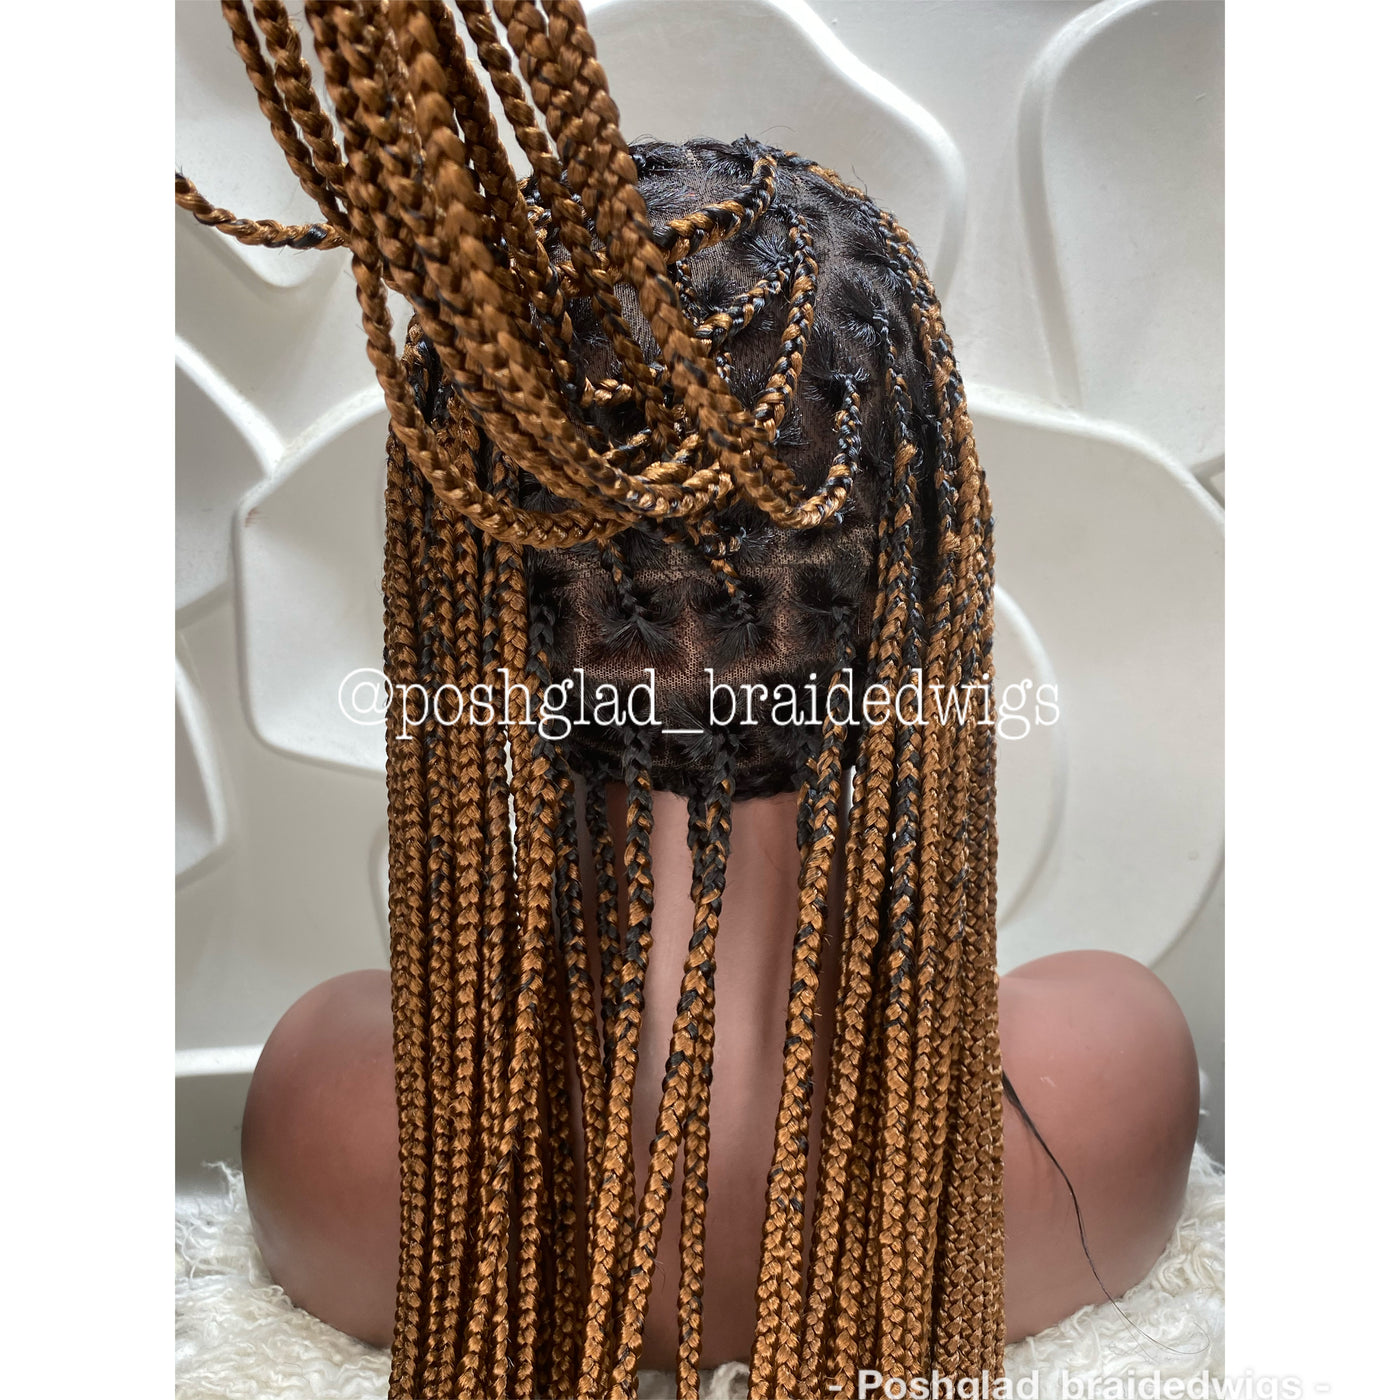 Knotless Braid Wig - Full Lace Ombre - Majida Poshglad Braided Wigs Knotless Braid Wig